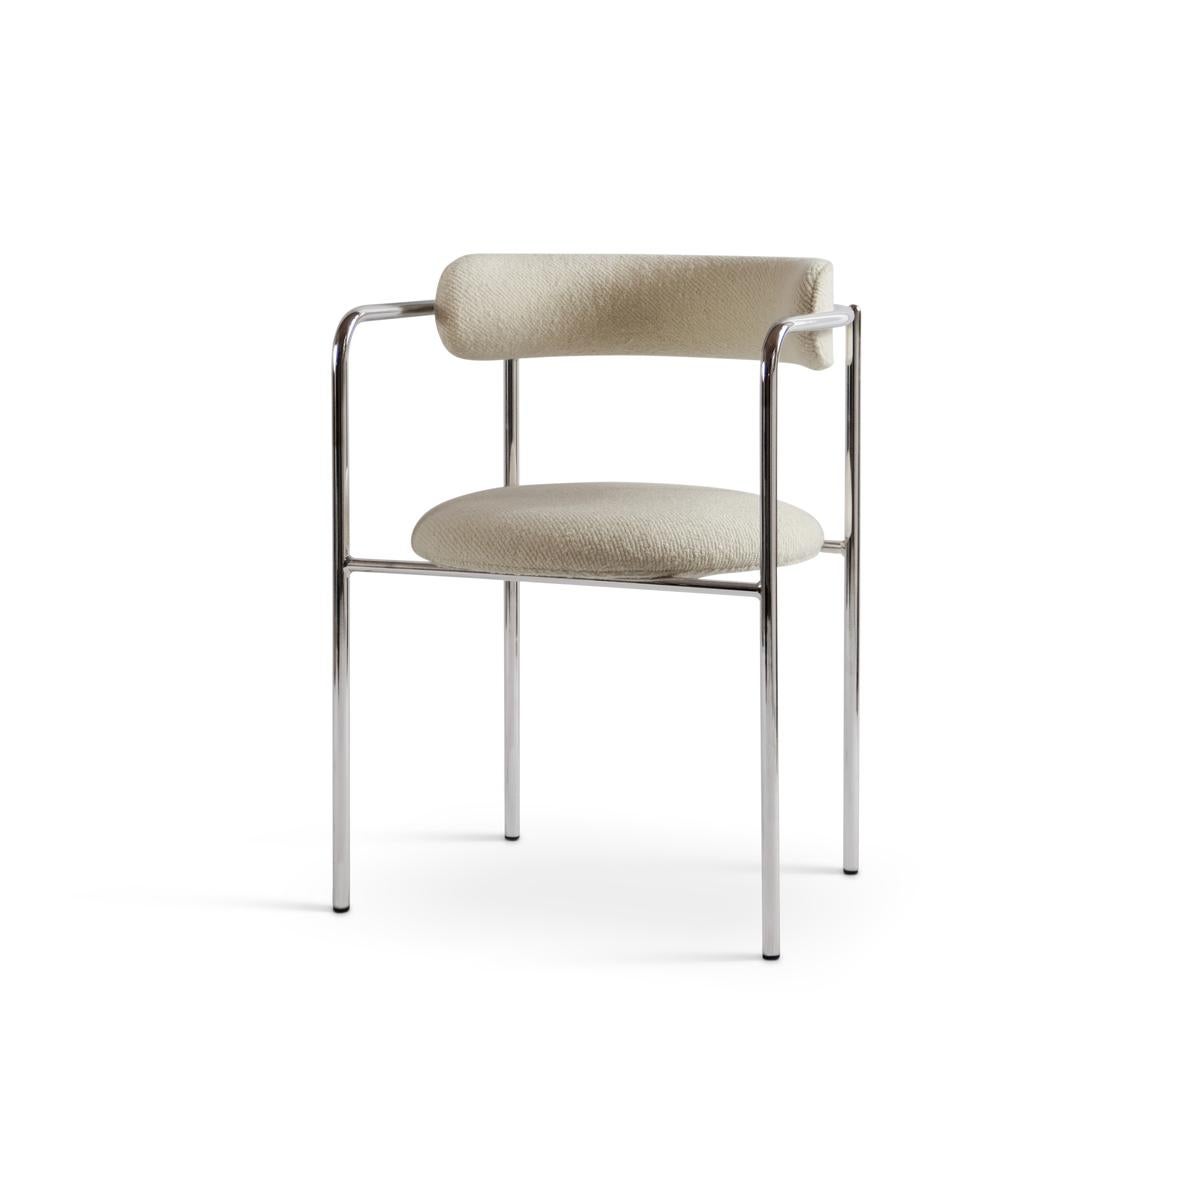 Contemporary Chair 'FF 4-Legs', Vidar Fabric, Black 1880 and White 1511 For Sale 12